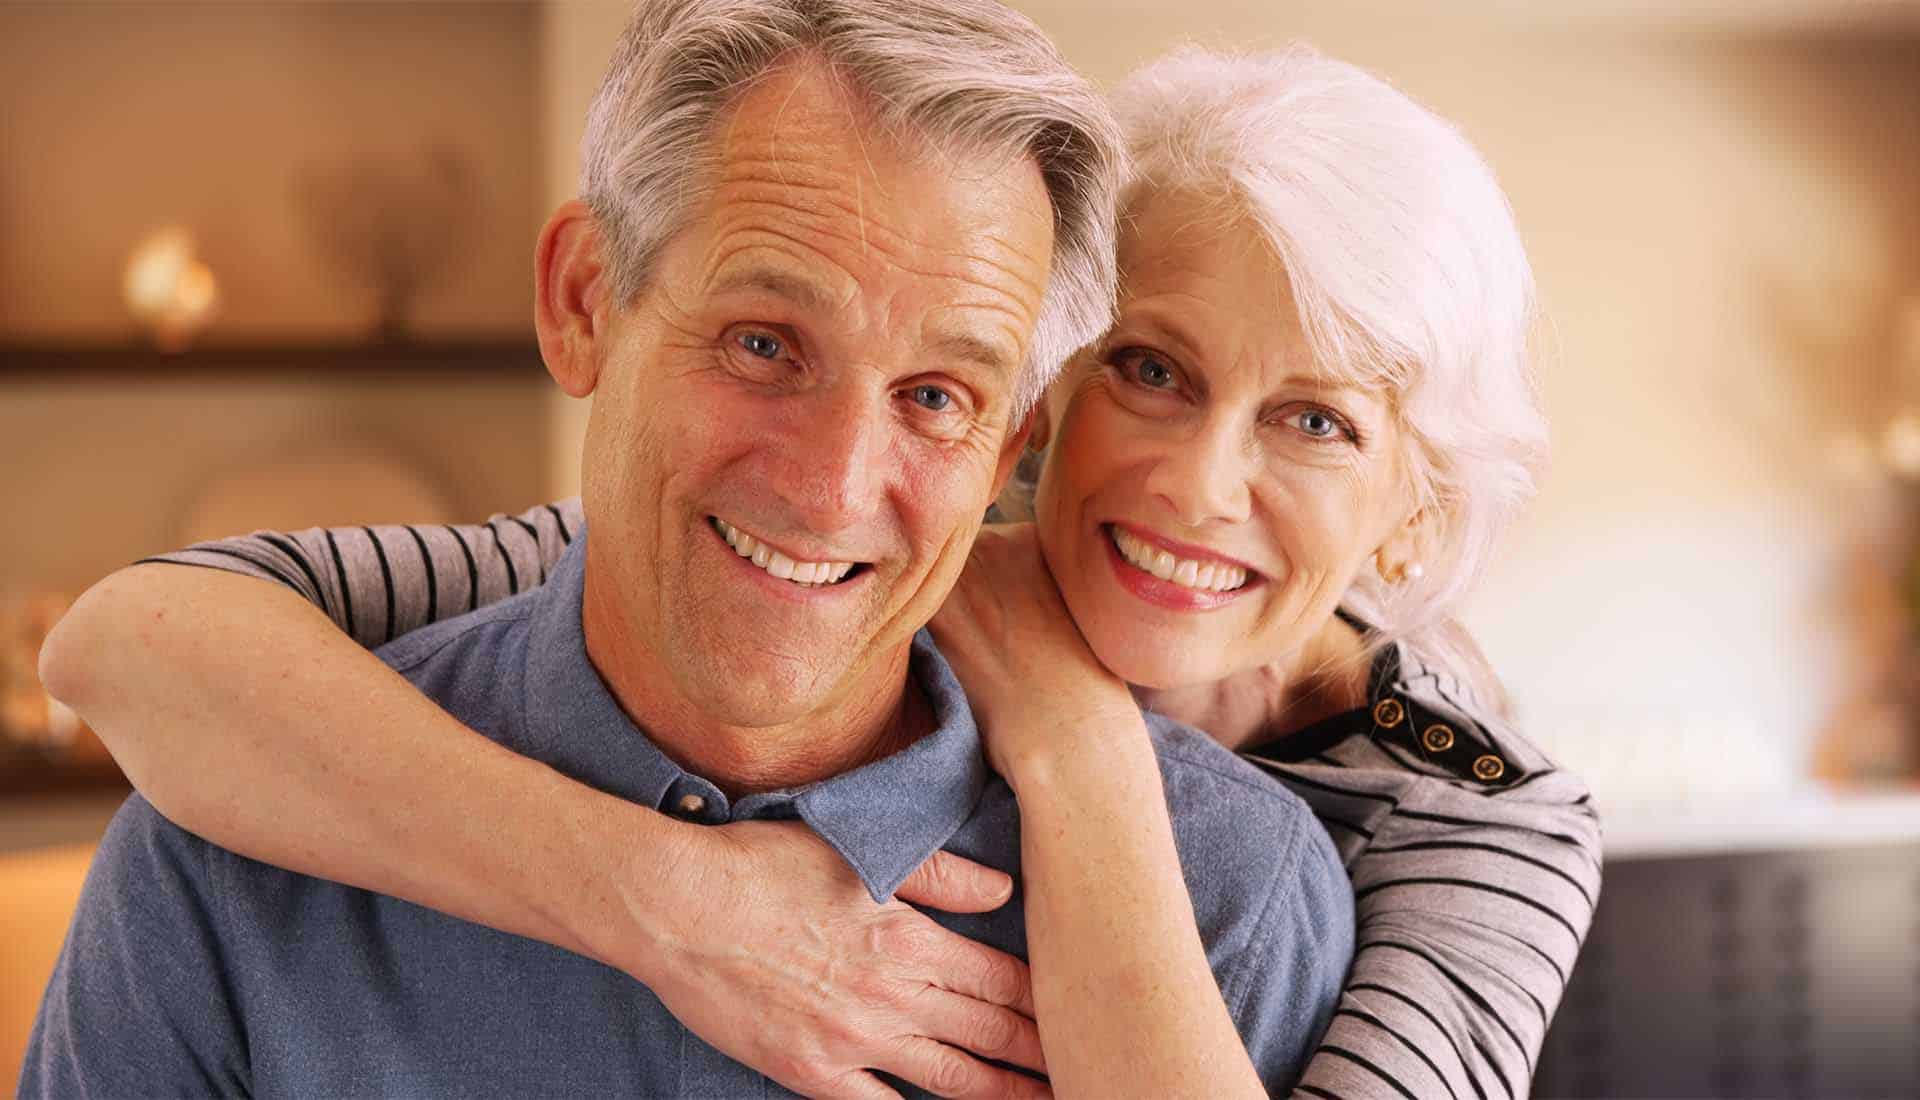 Happy elderly couple sitting at home smiling.